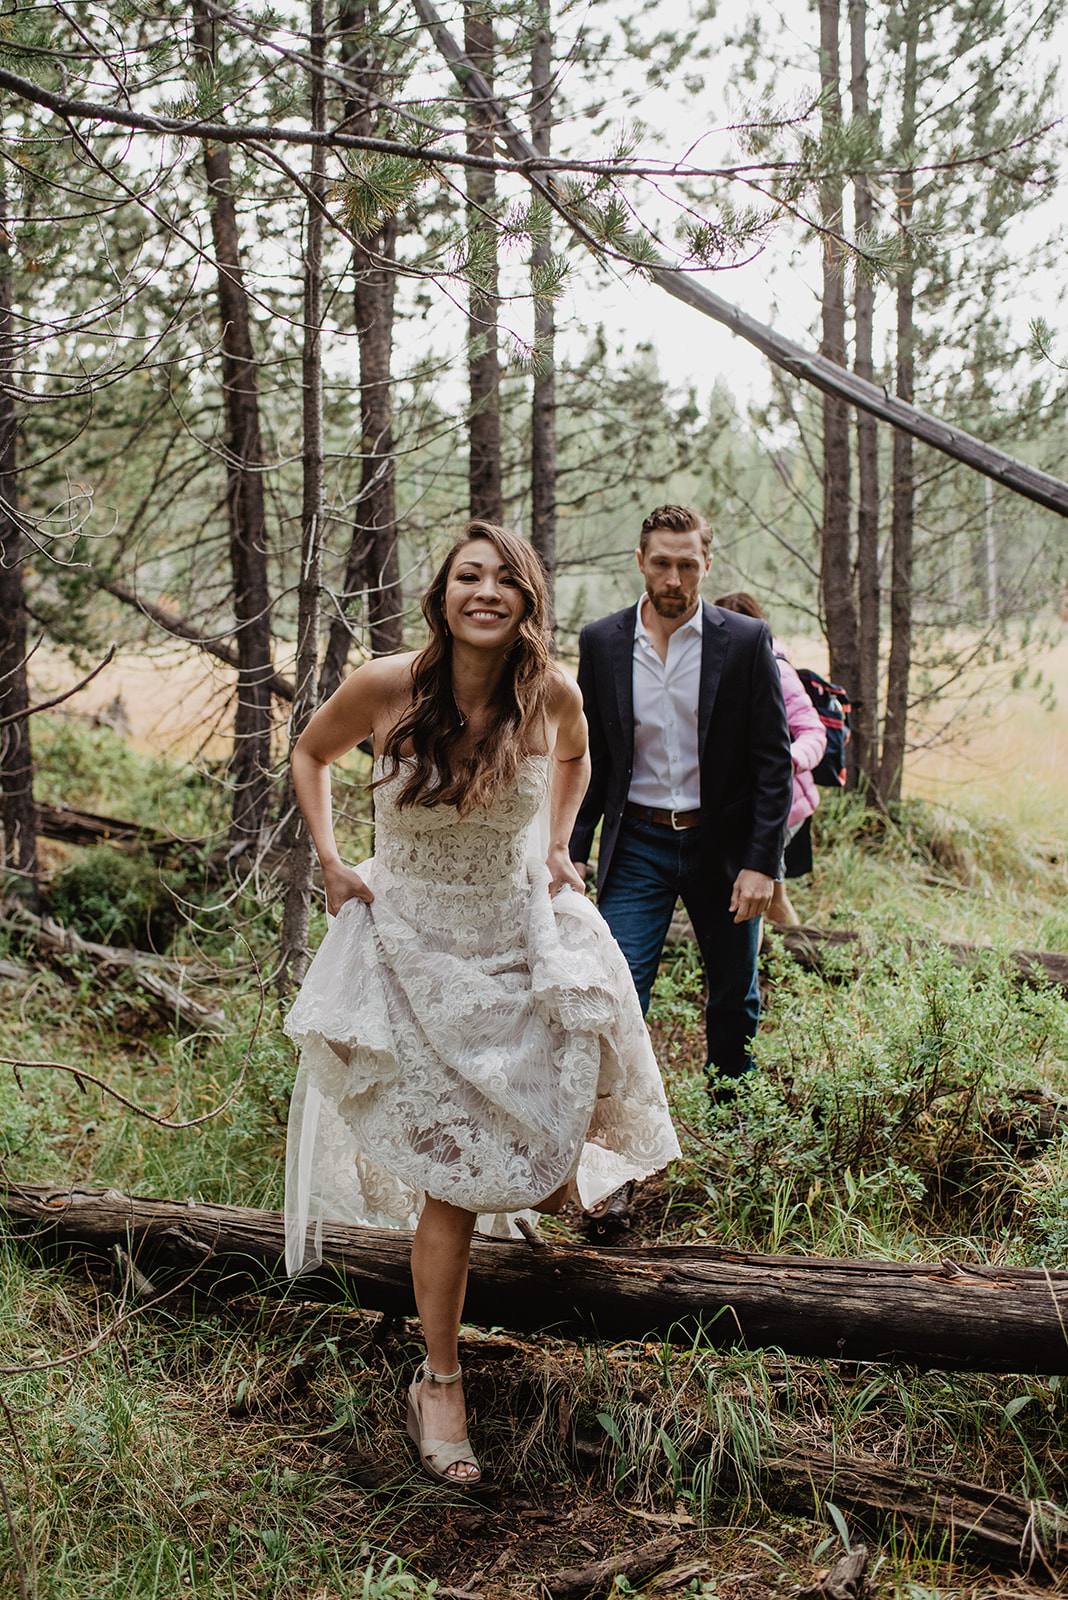 bride stepping over a fallen tree while hiking in her wedding dress in the Grand Tetons for her adventure wedding at Taggart Lake with her groom following behind her